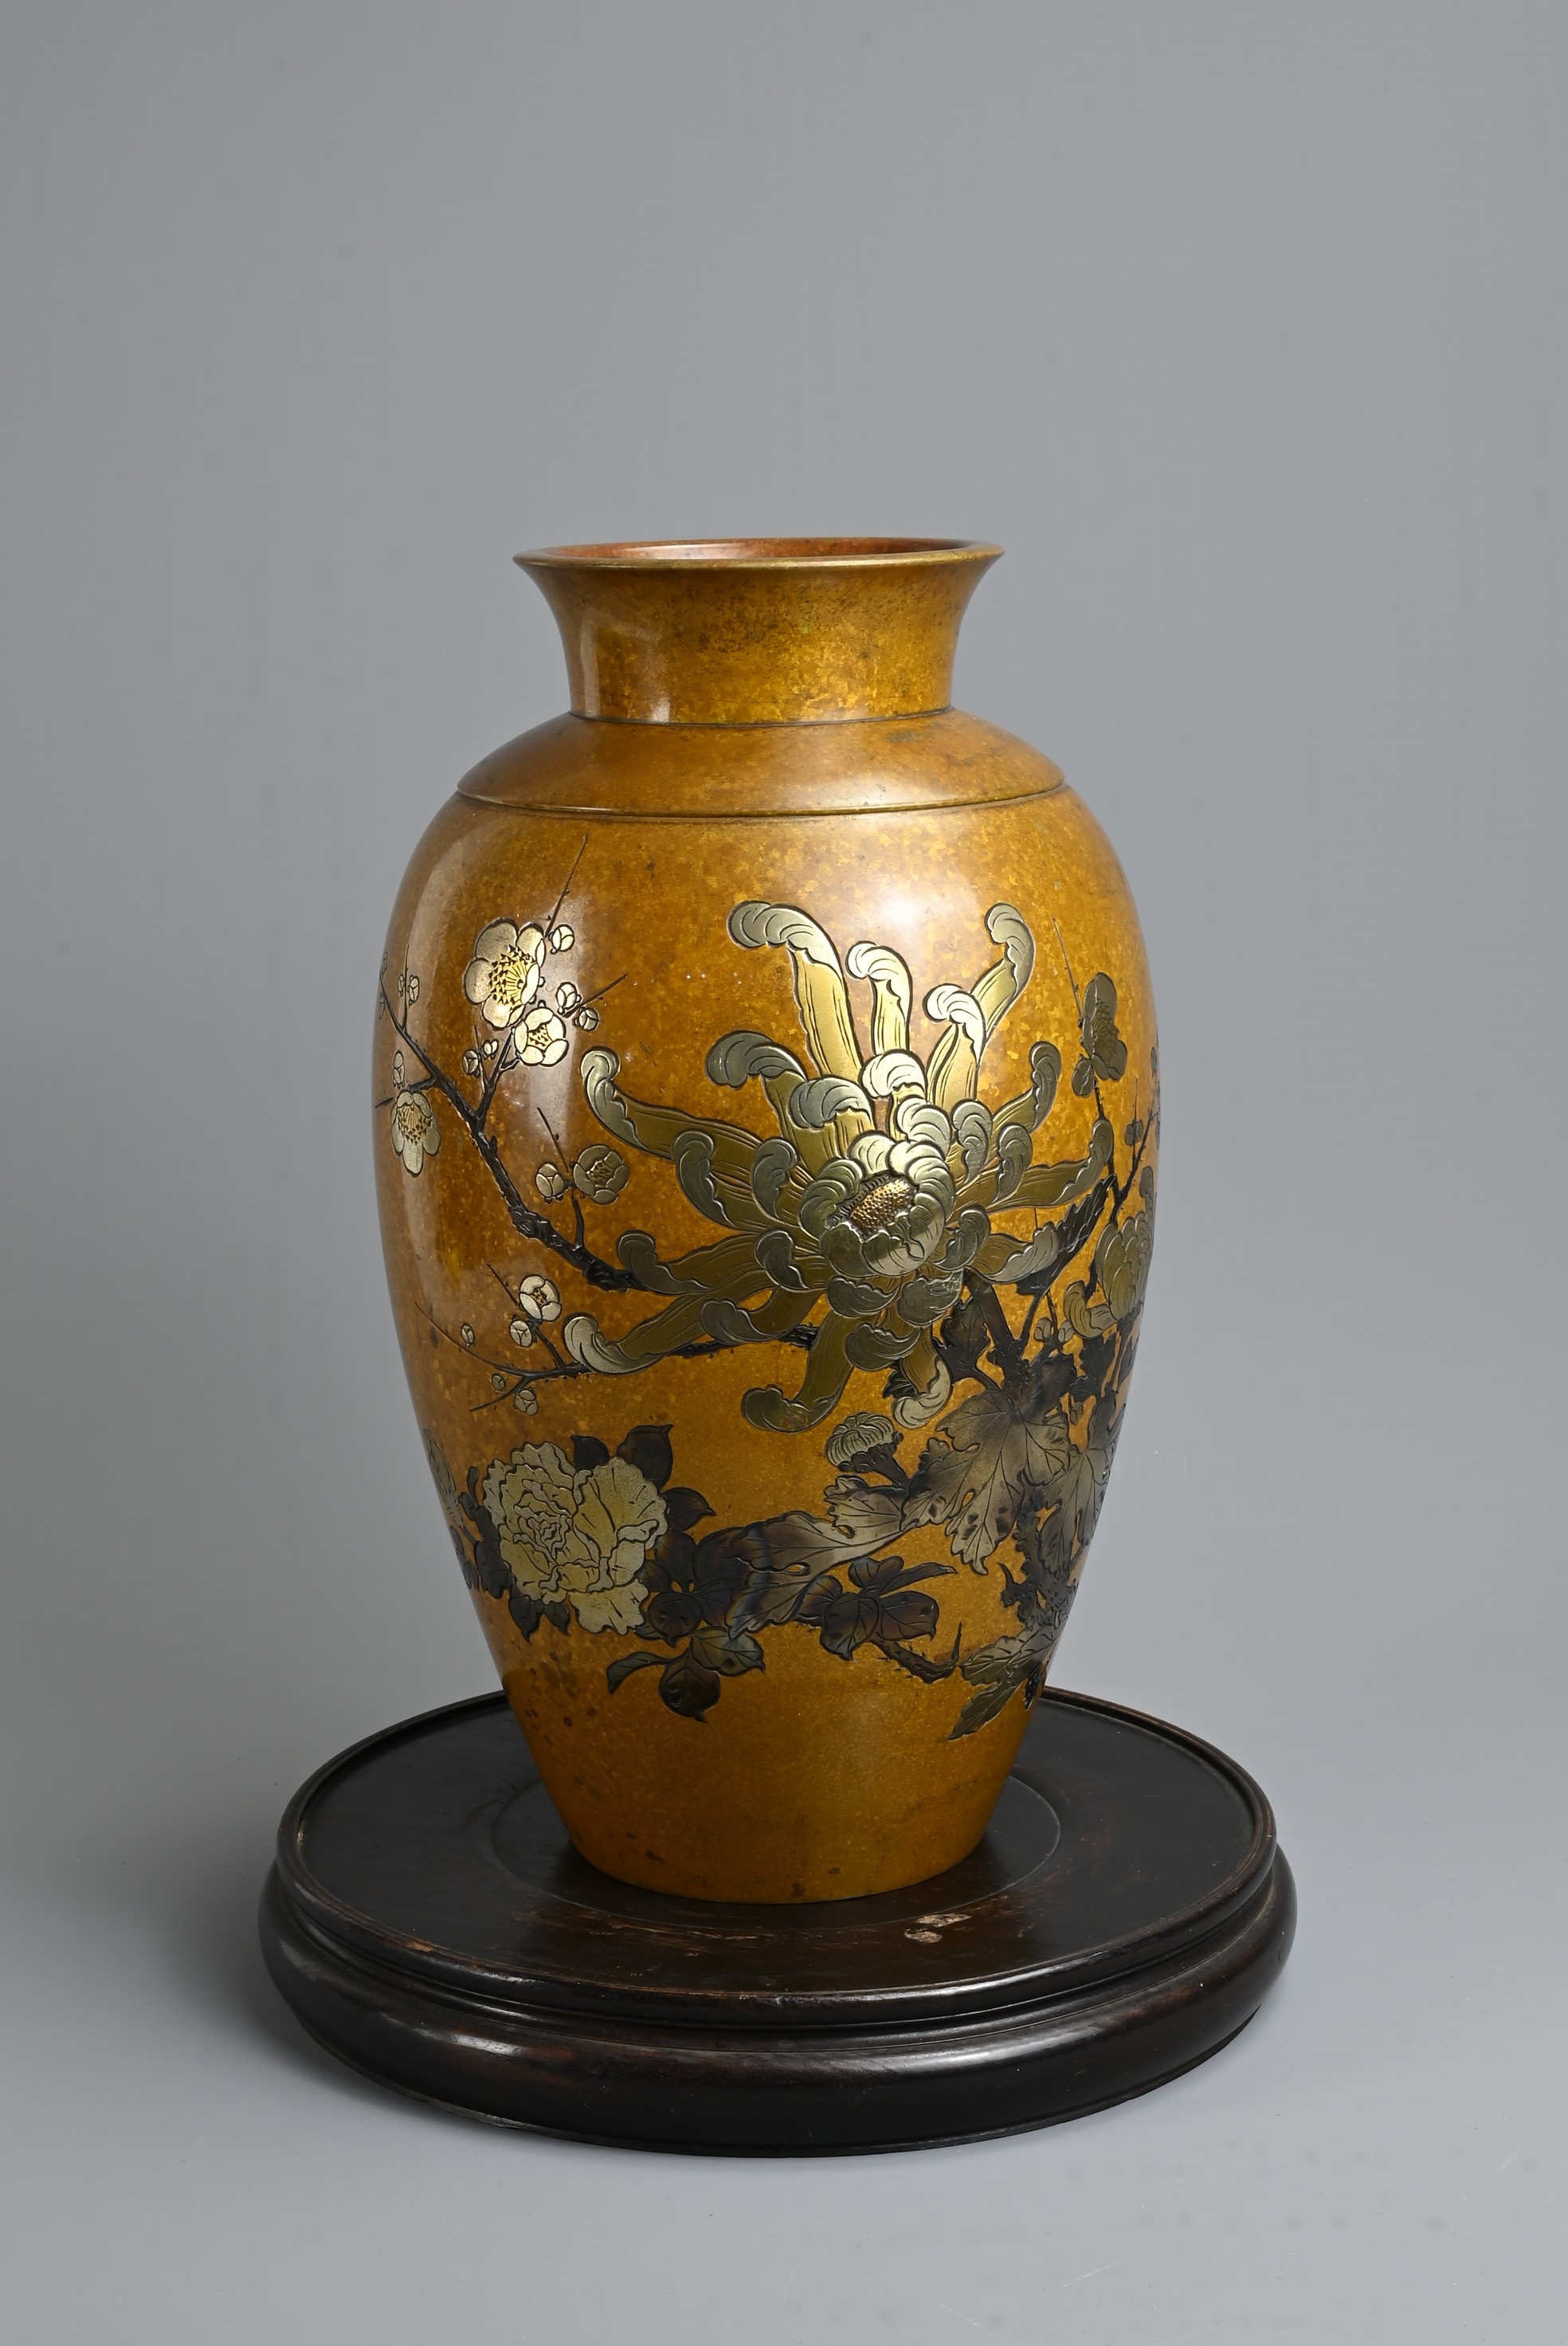 AN EARLY 20TH CENTURY JAPANESE PATINATED BRONZE OVIFORM VASE ON A TURNED WOODEN STAND. The vase